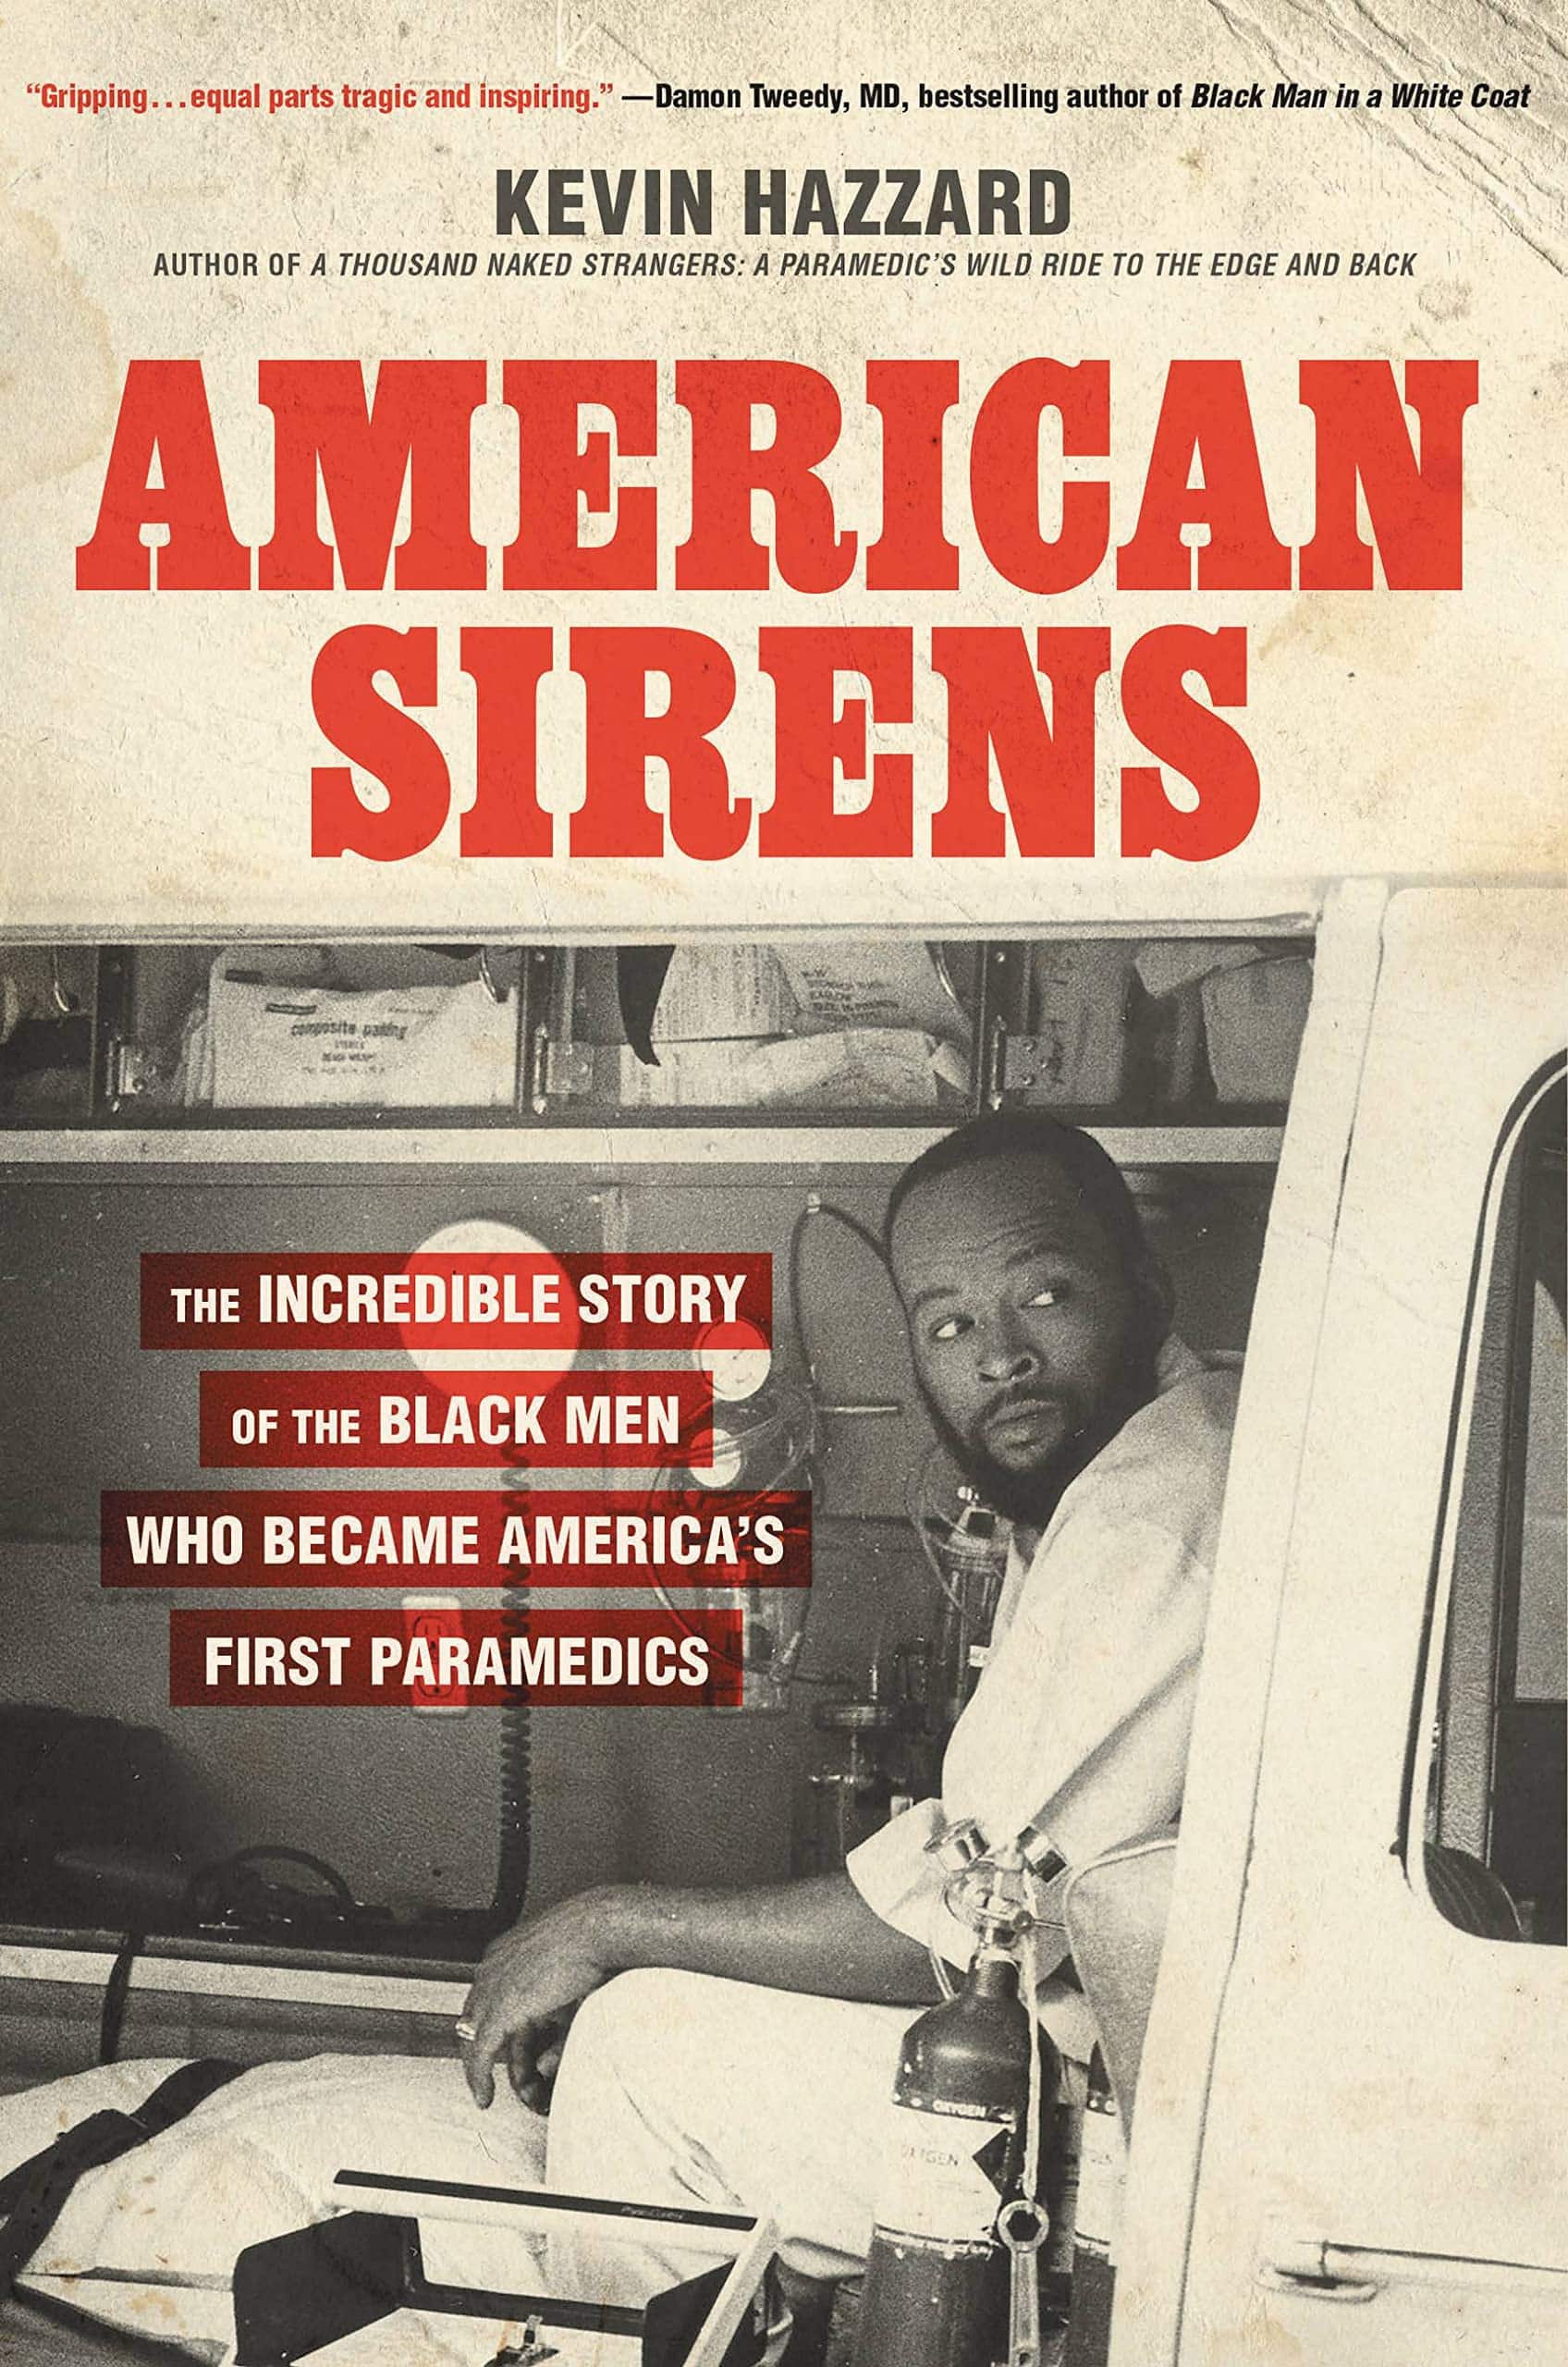 book cover showing a Black man in the back of an ambulance.